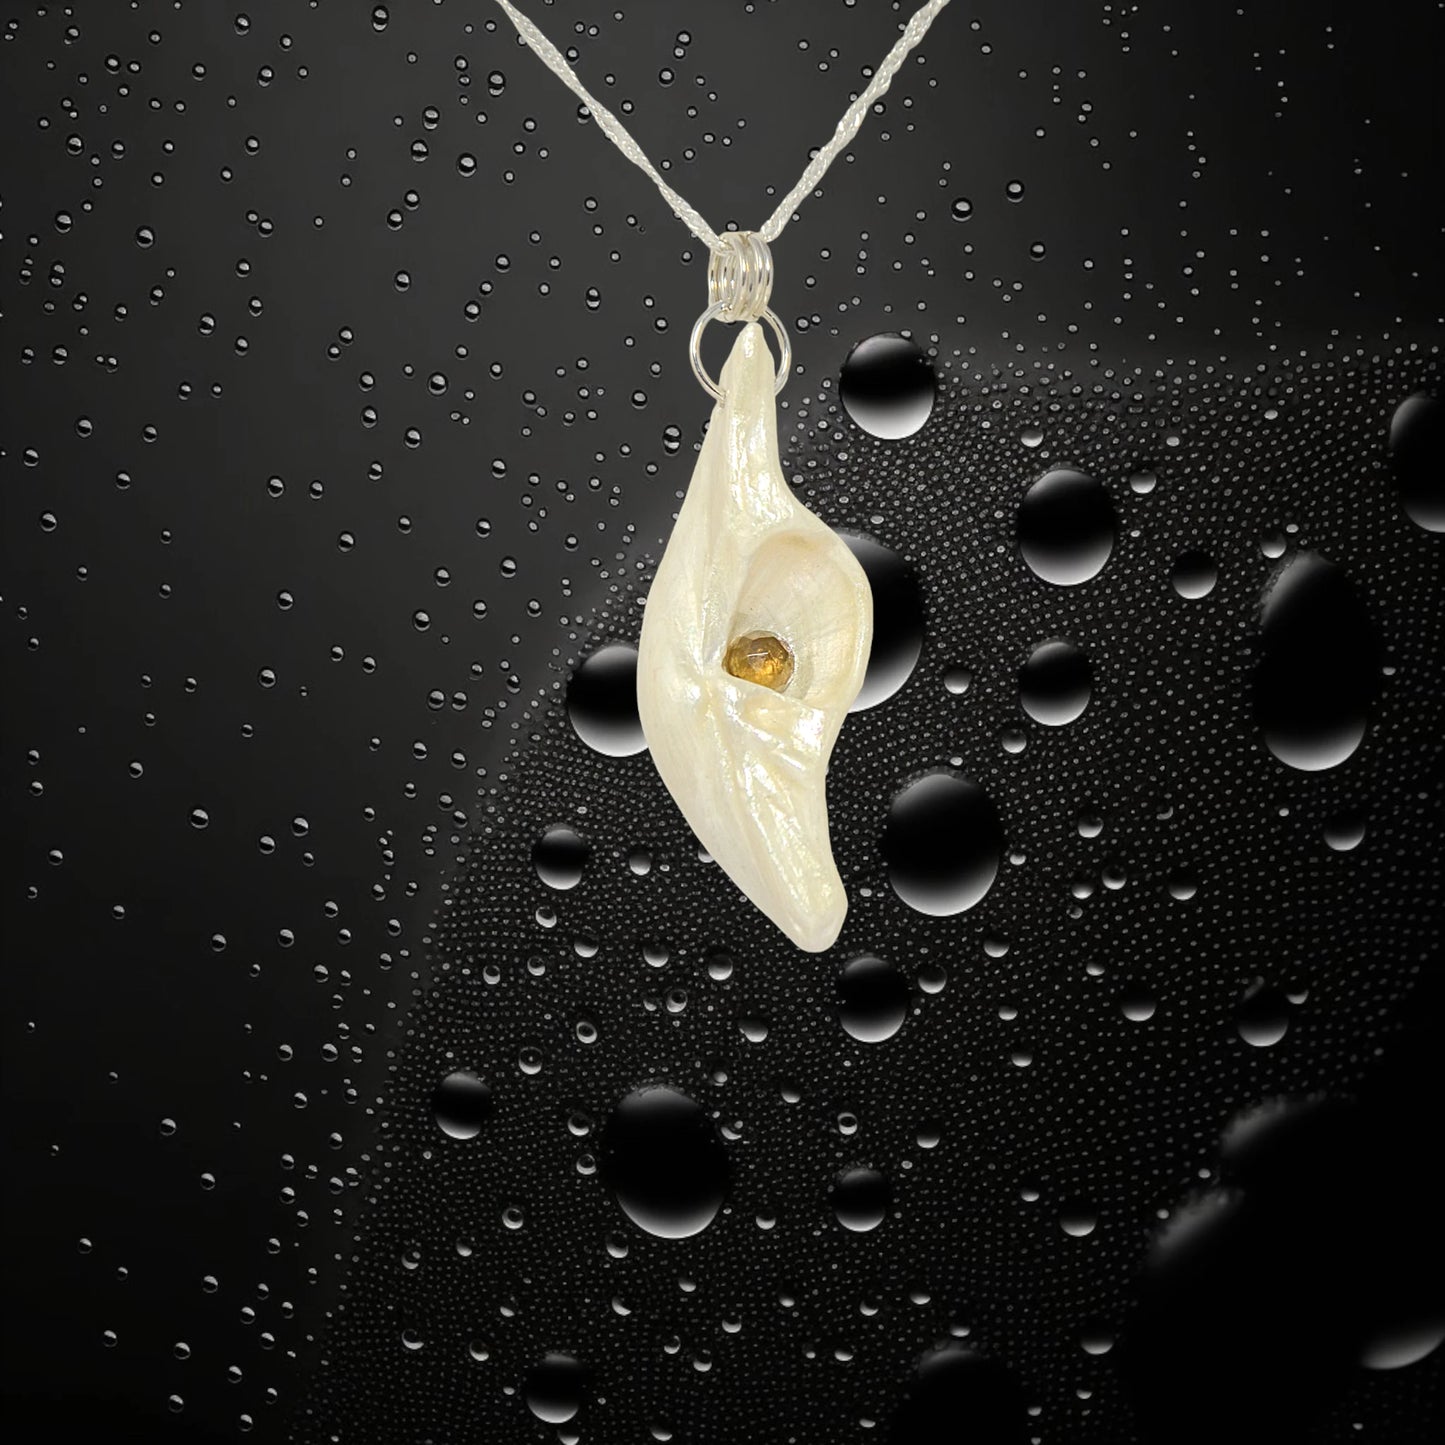 Seer is a natural seashell pendant with a beautiful 5mm rose cut Smokey Quartz compliments the pendant. The pendant is in front of a black background with water bubbles.